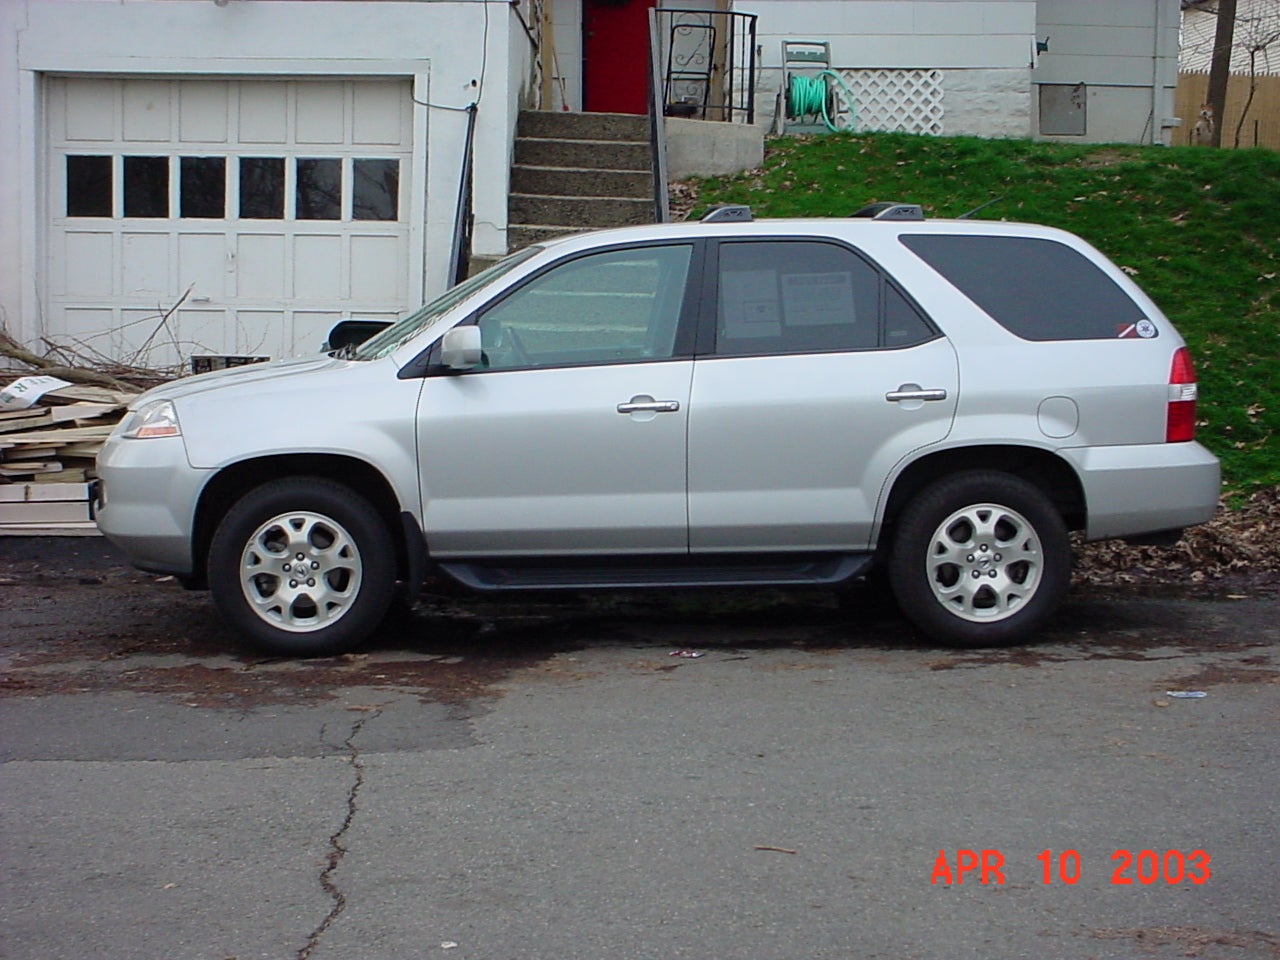 2002 Acura MDX - Pictures - 2002 Acura MDX Touring picture ...